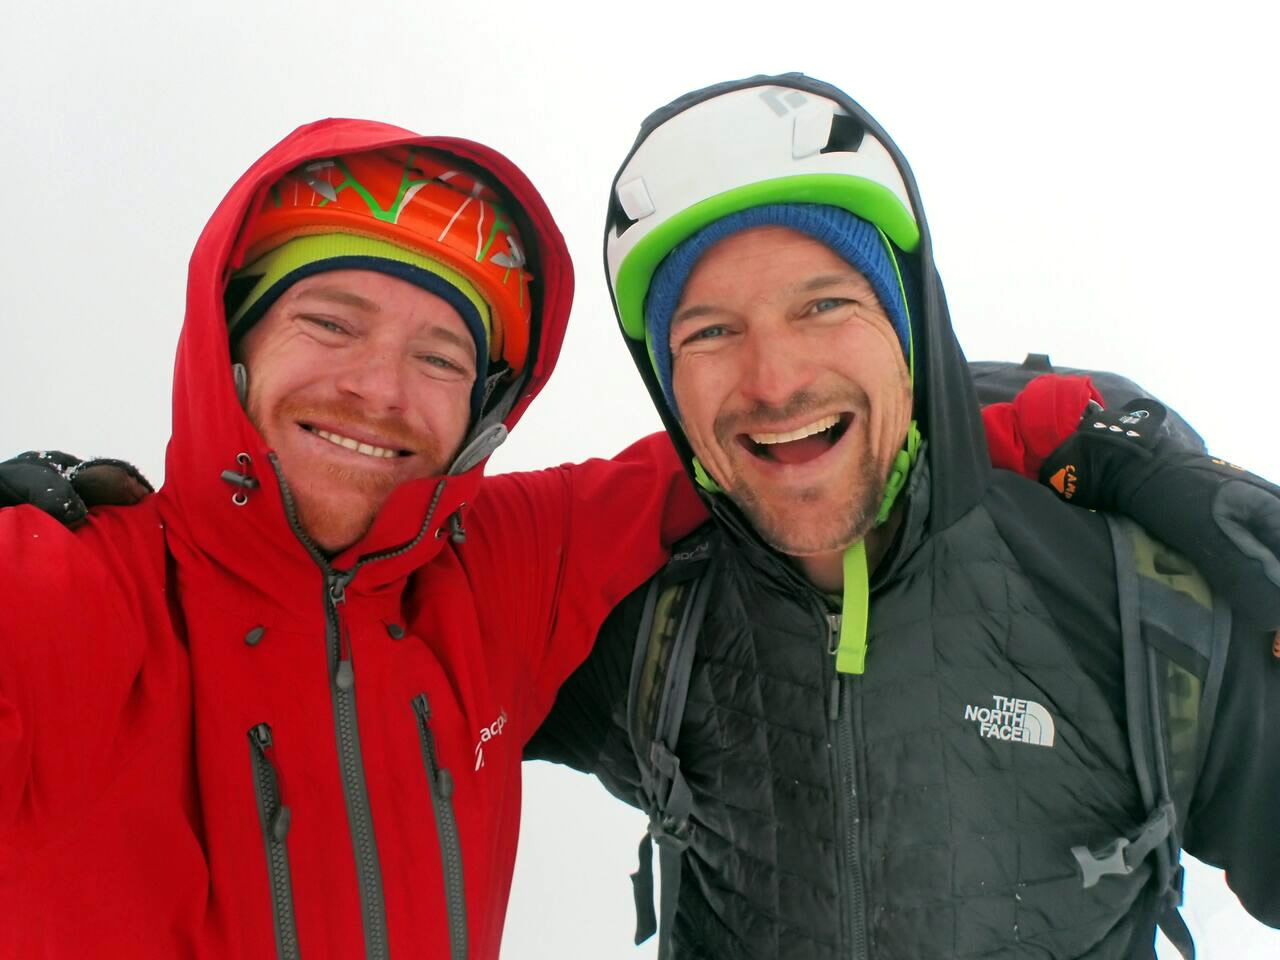 Ben Dare (left) and Steve Skelton (right), happy and a little teary eyed on a view-less summit after completing their new route on Taulliraju. [Photo] Ben Dare